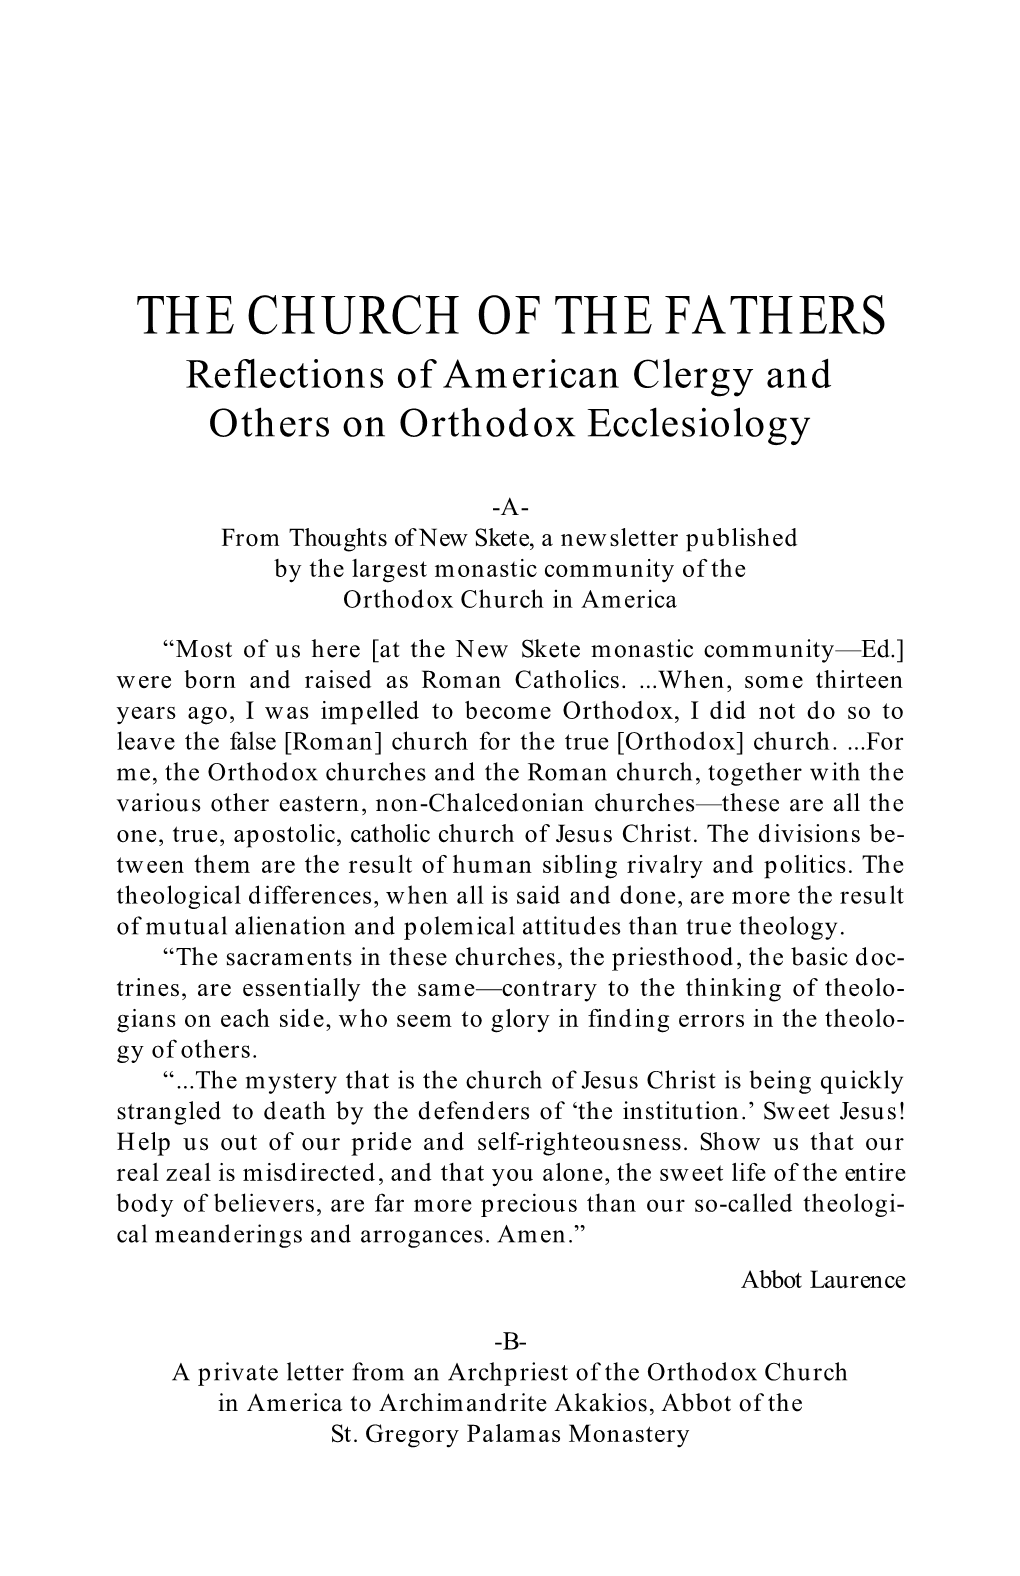 THE CHURCH of the FATHERS Reflections of American Clergy and Others on Orthodox Ecclesiology